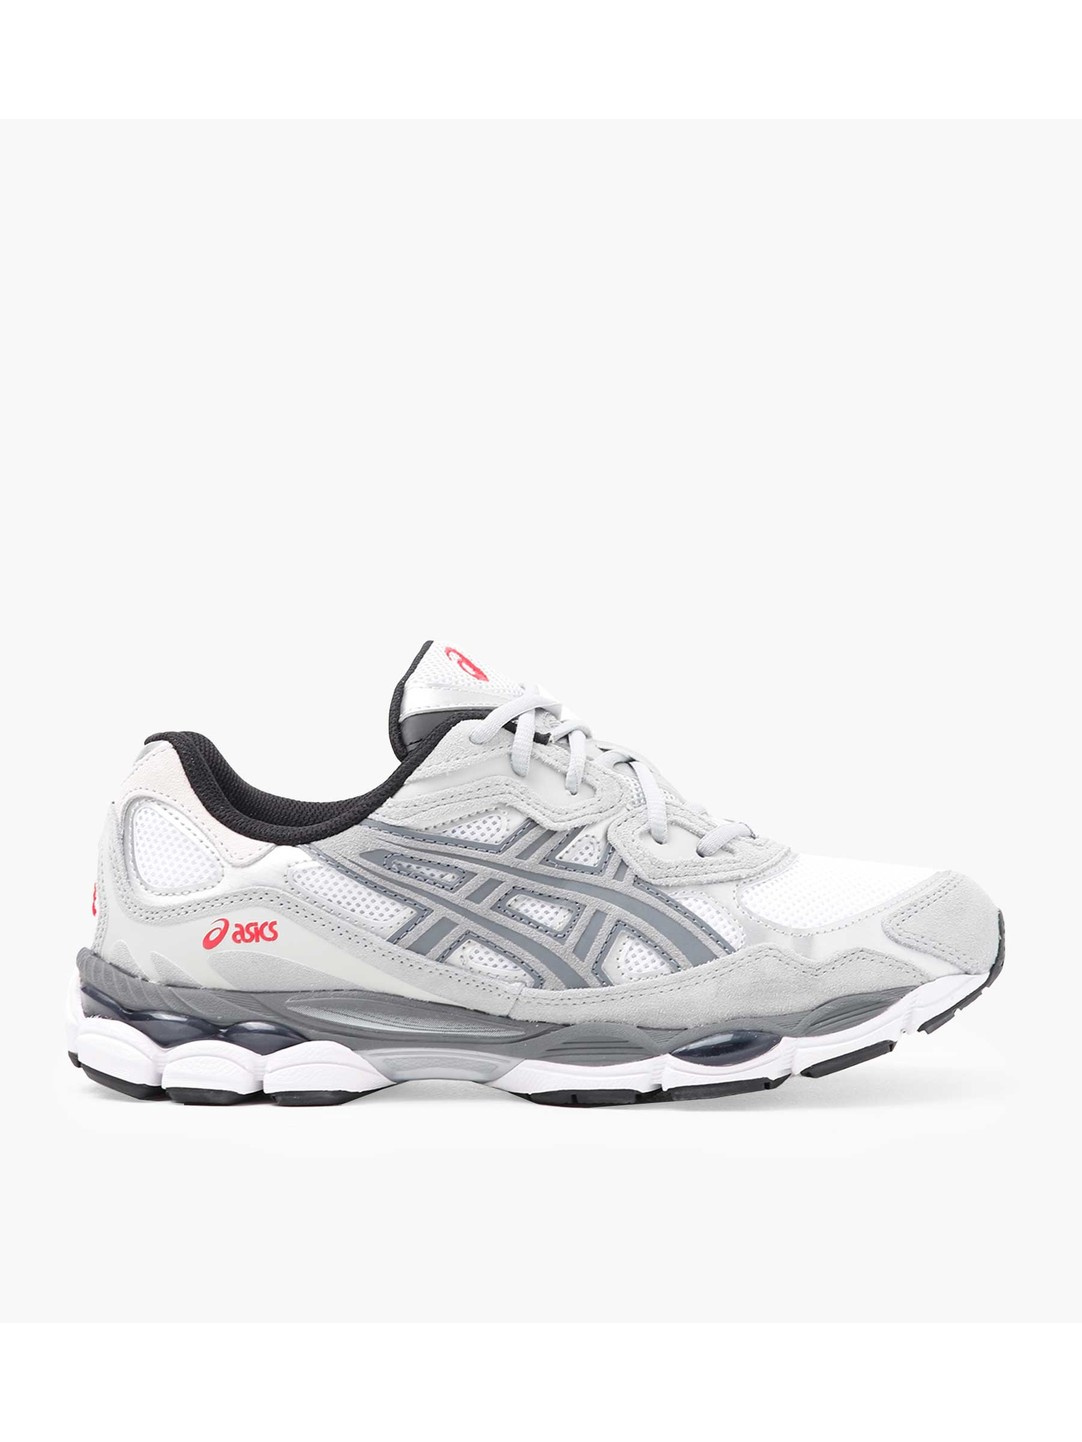 Asics Gel-Nyc White Steel Grey - Baskèts Stores